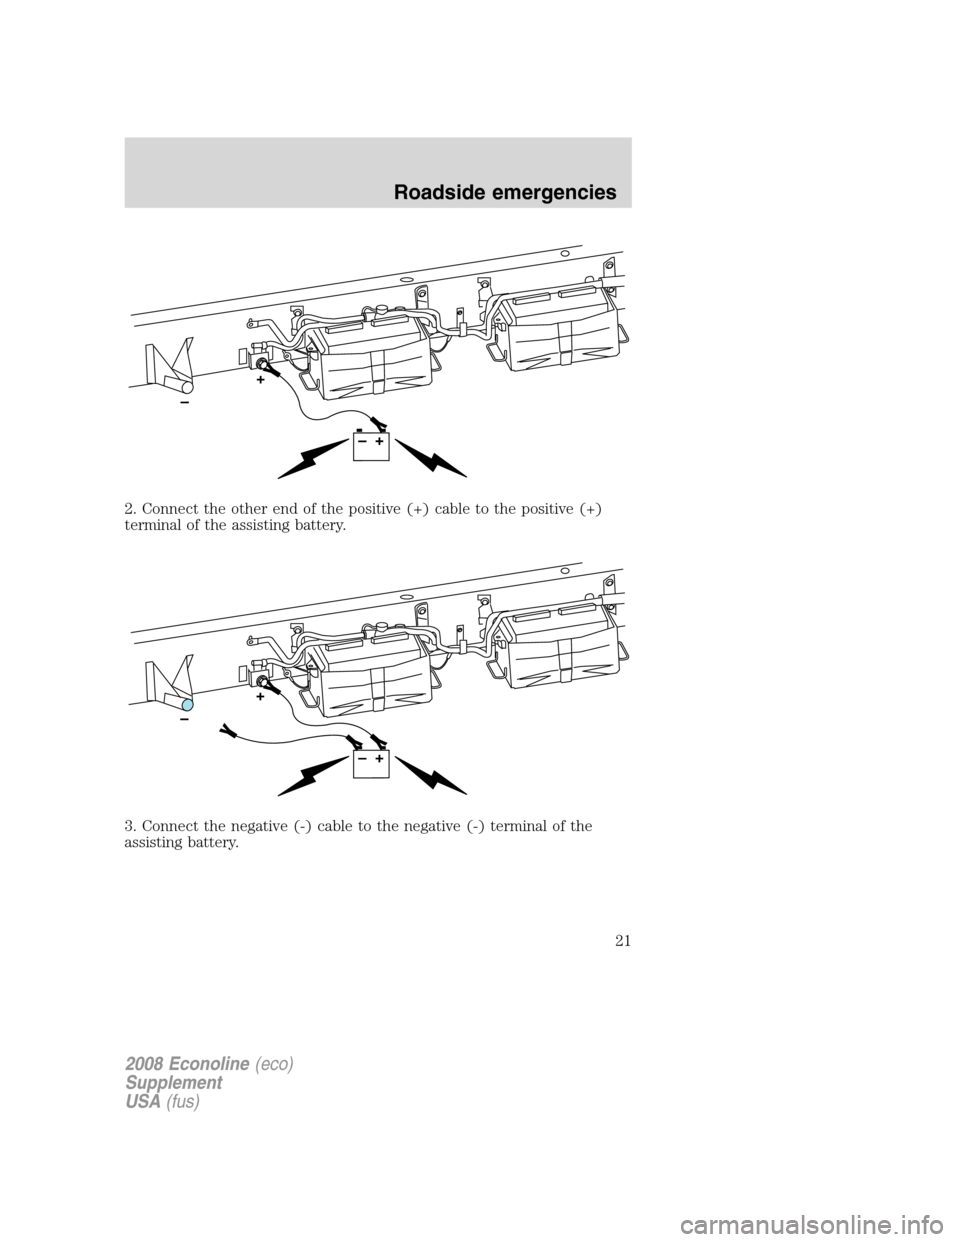 FORD SUPER DUTY 2008 2.G Diesel Supplement Manual 2. Connect the other end of the positive (+) cable to the positive (+)
terminal of the assisting battery.
3. Connect the negative (-) cable to the negative (-) terminal of the
assisting battery.
2008 